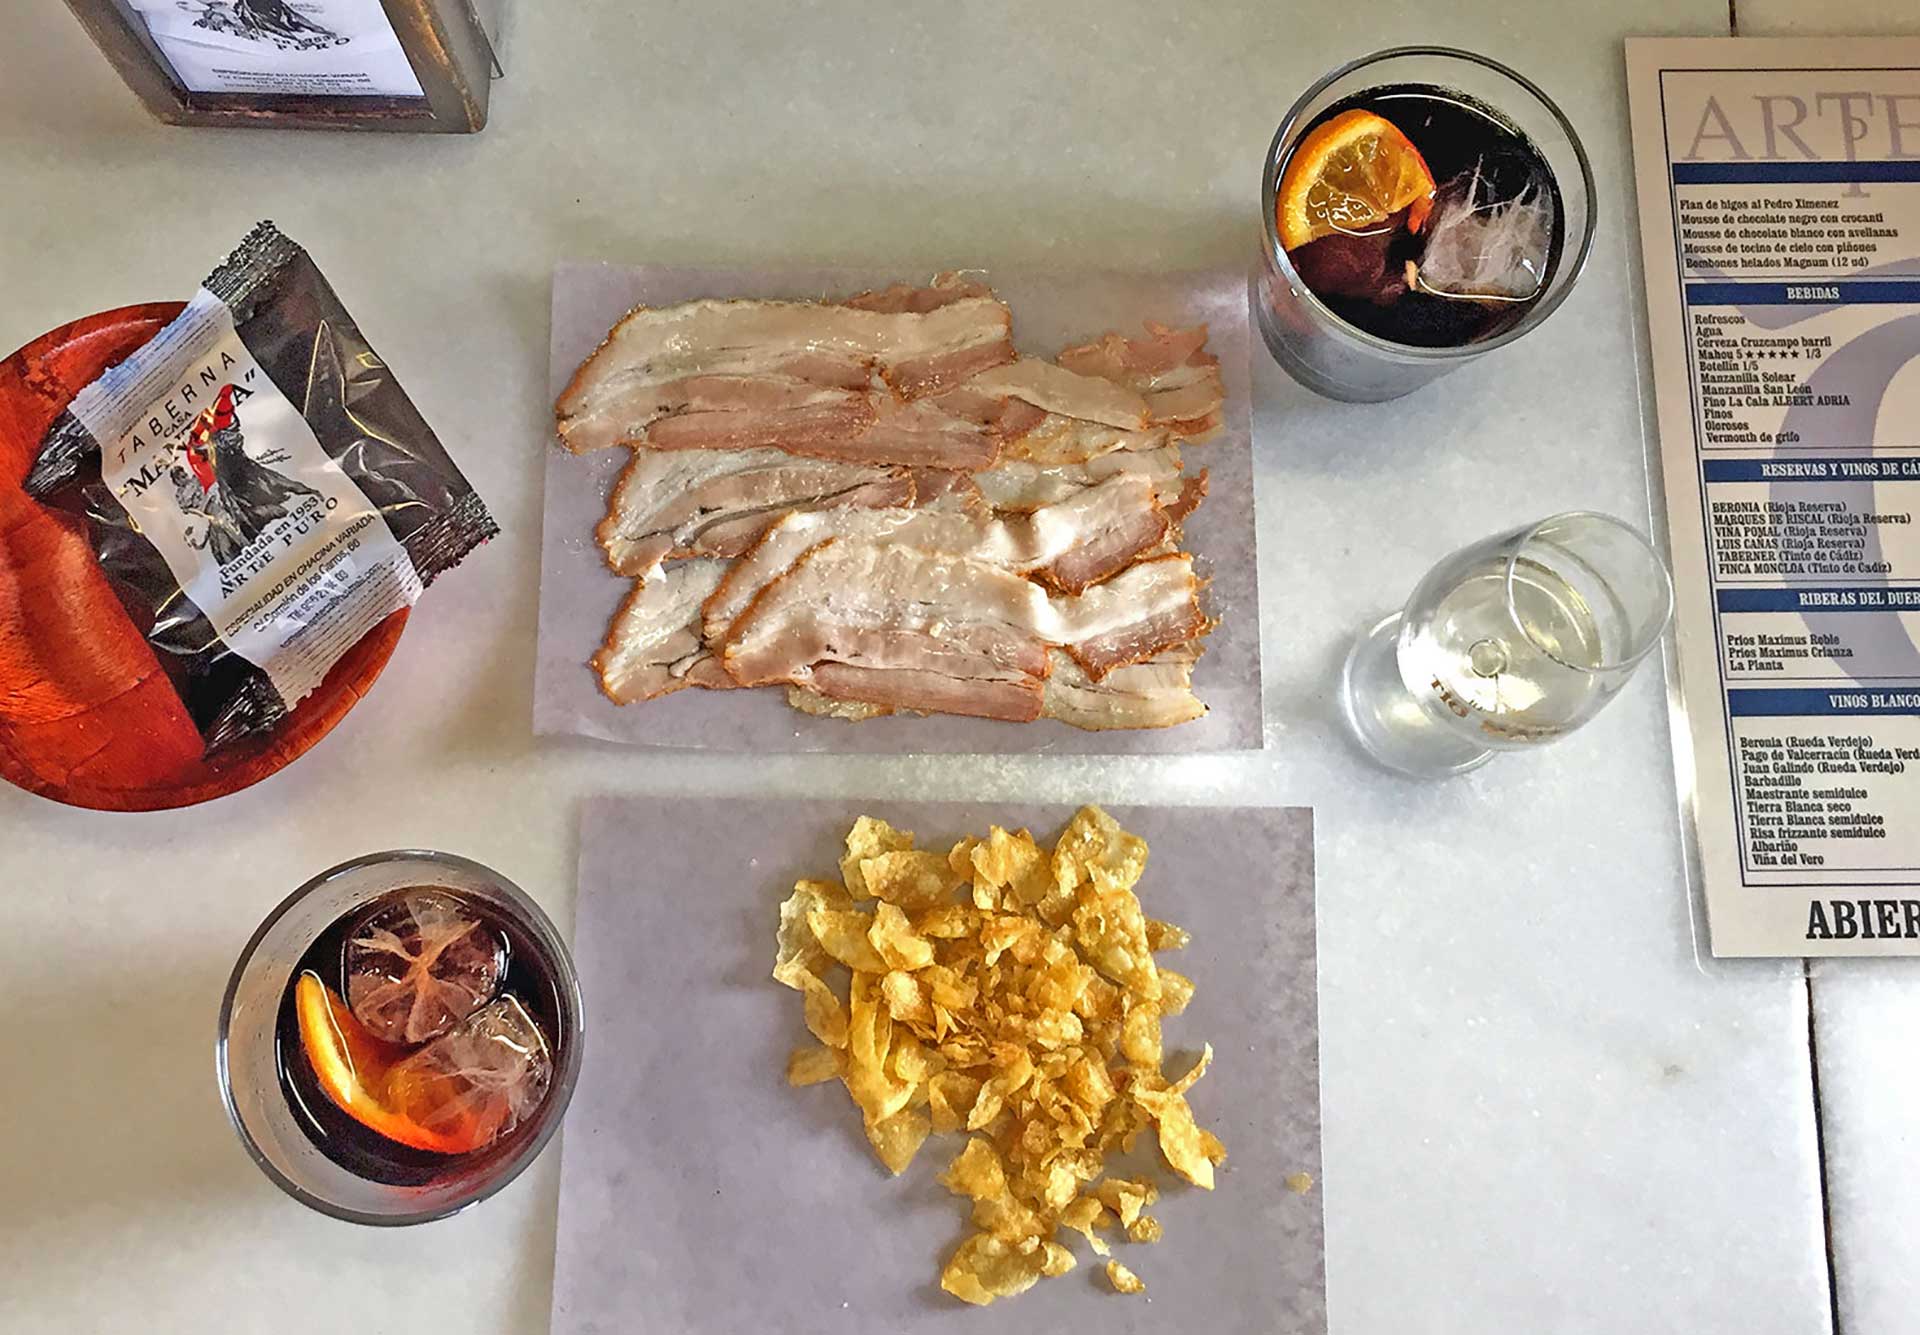 Food, sherry wines, sherry vermouth and tapas are the basics in a tabanco in Jerez